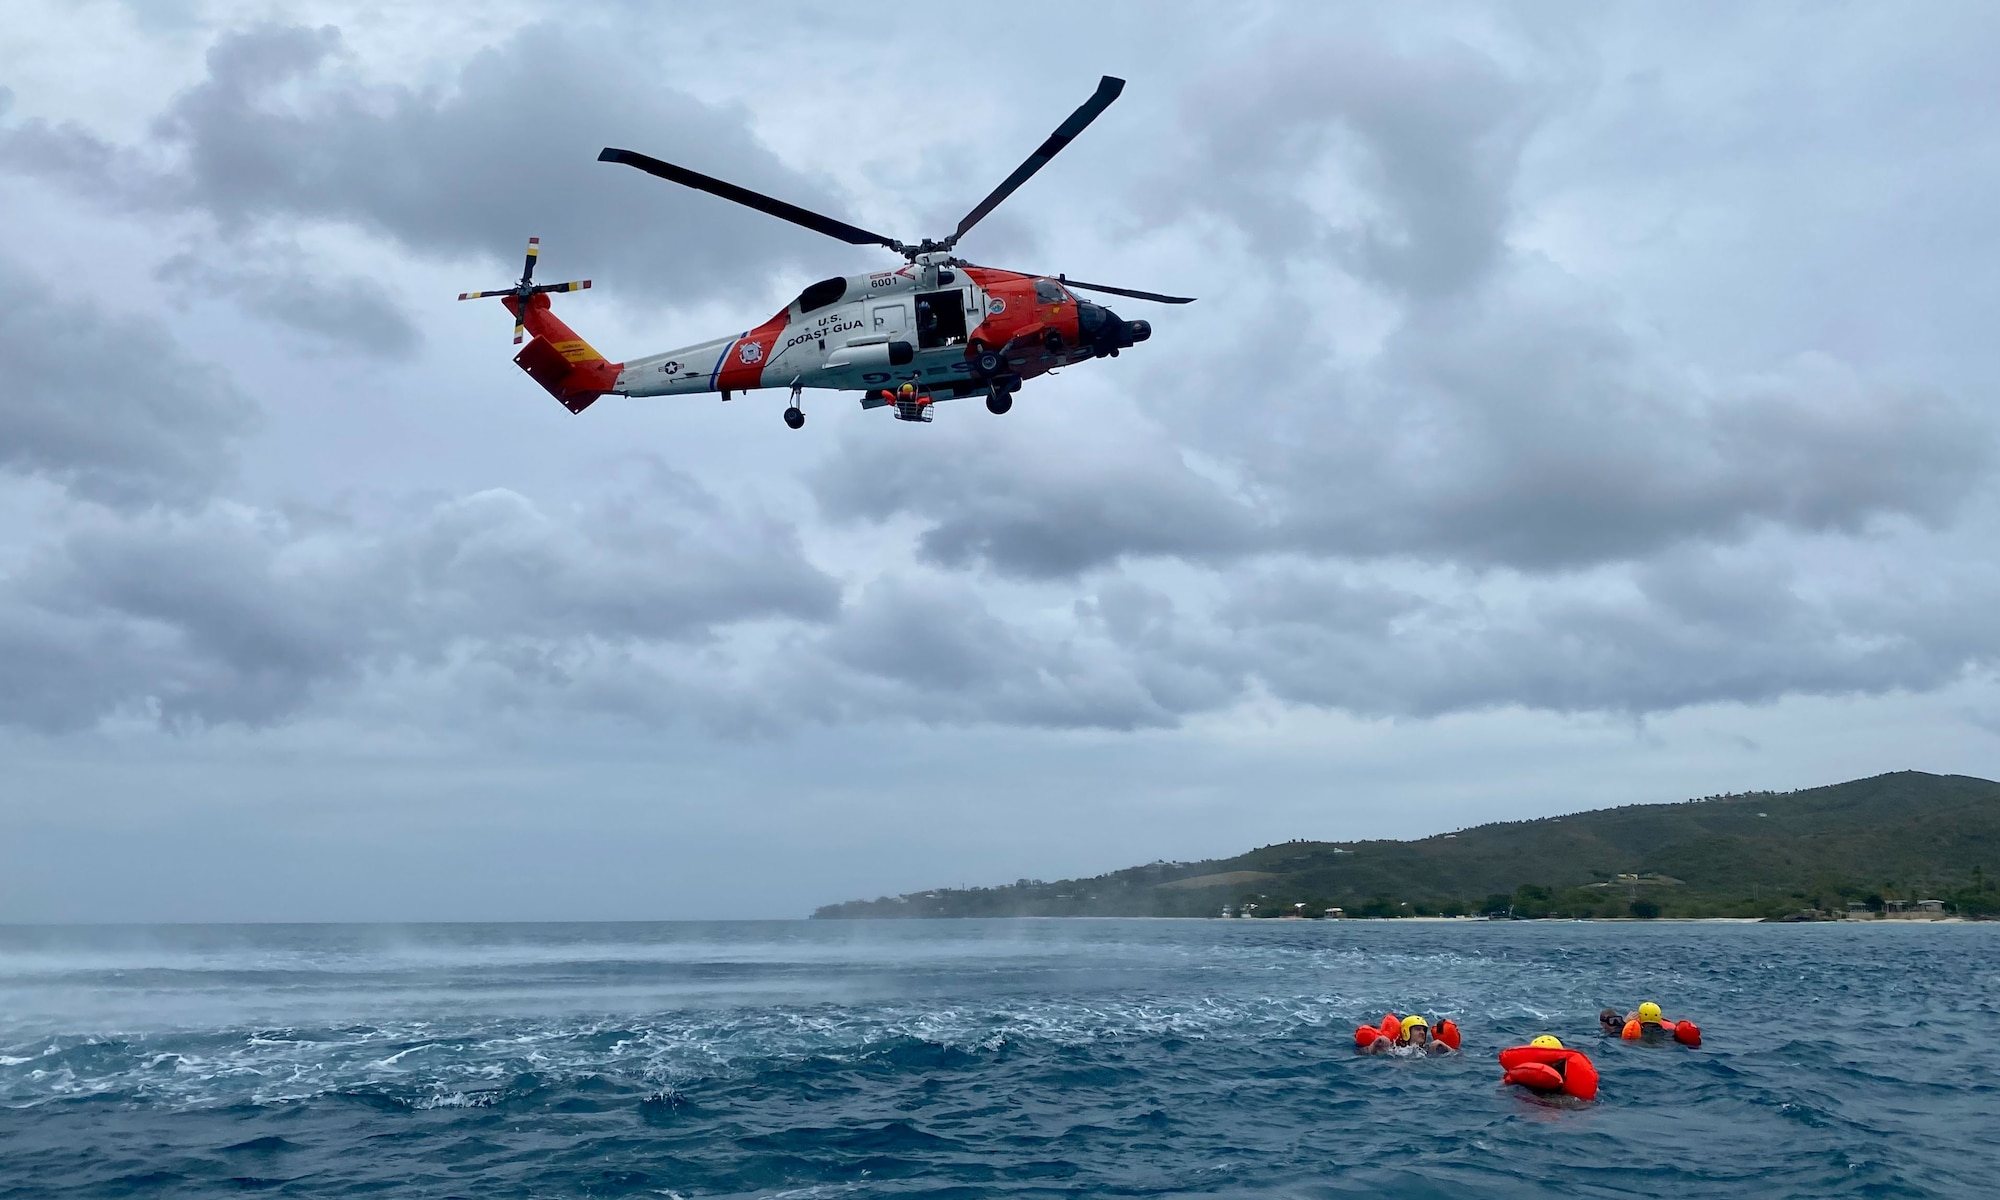 A helicopter hovers over water. Three people in life vests are in the water.